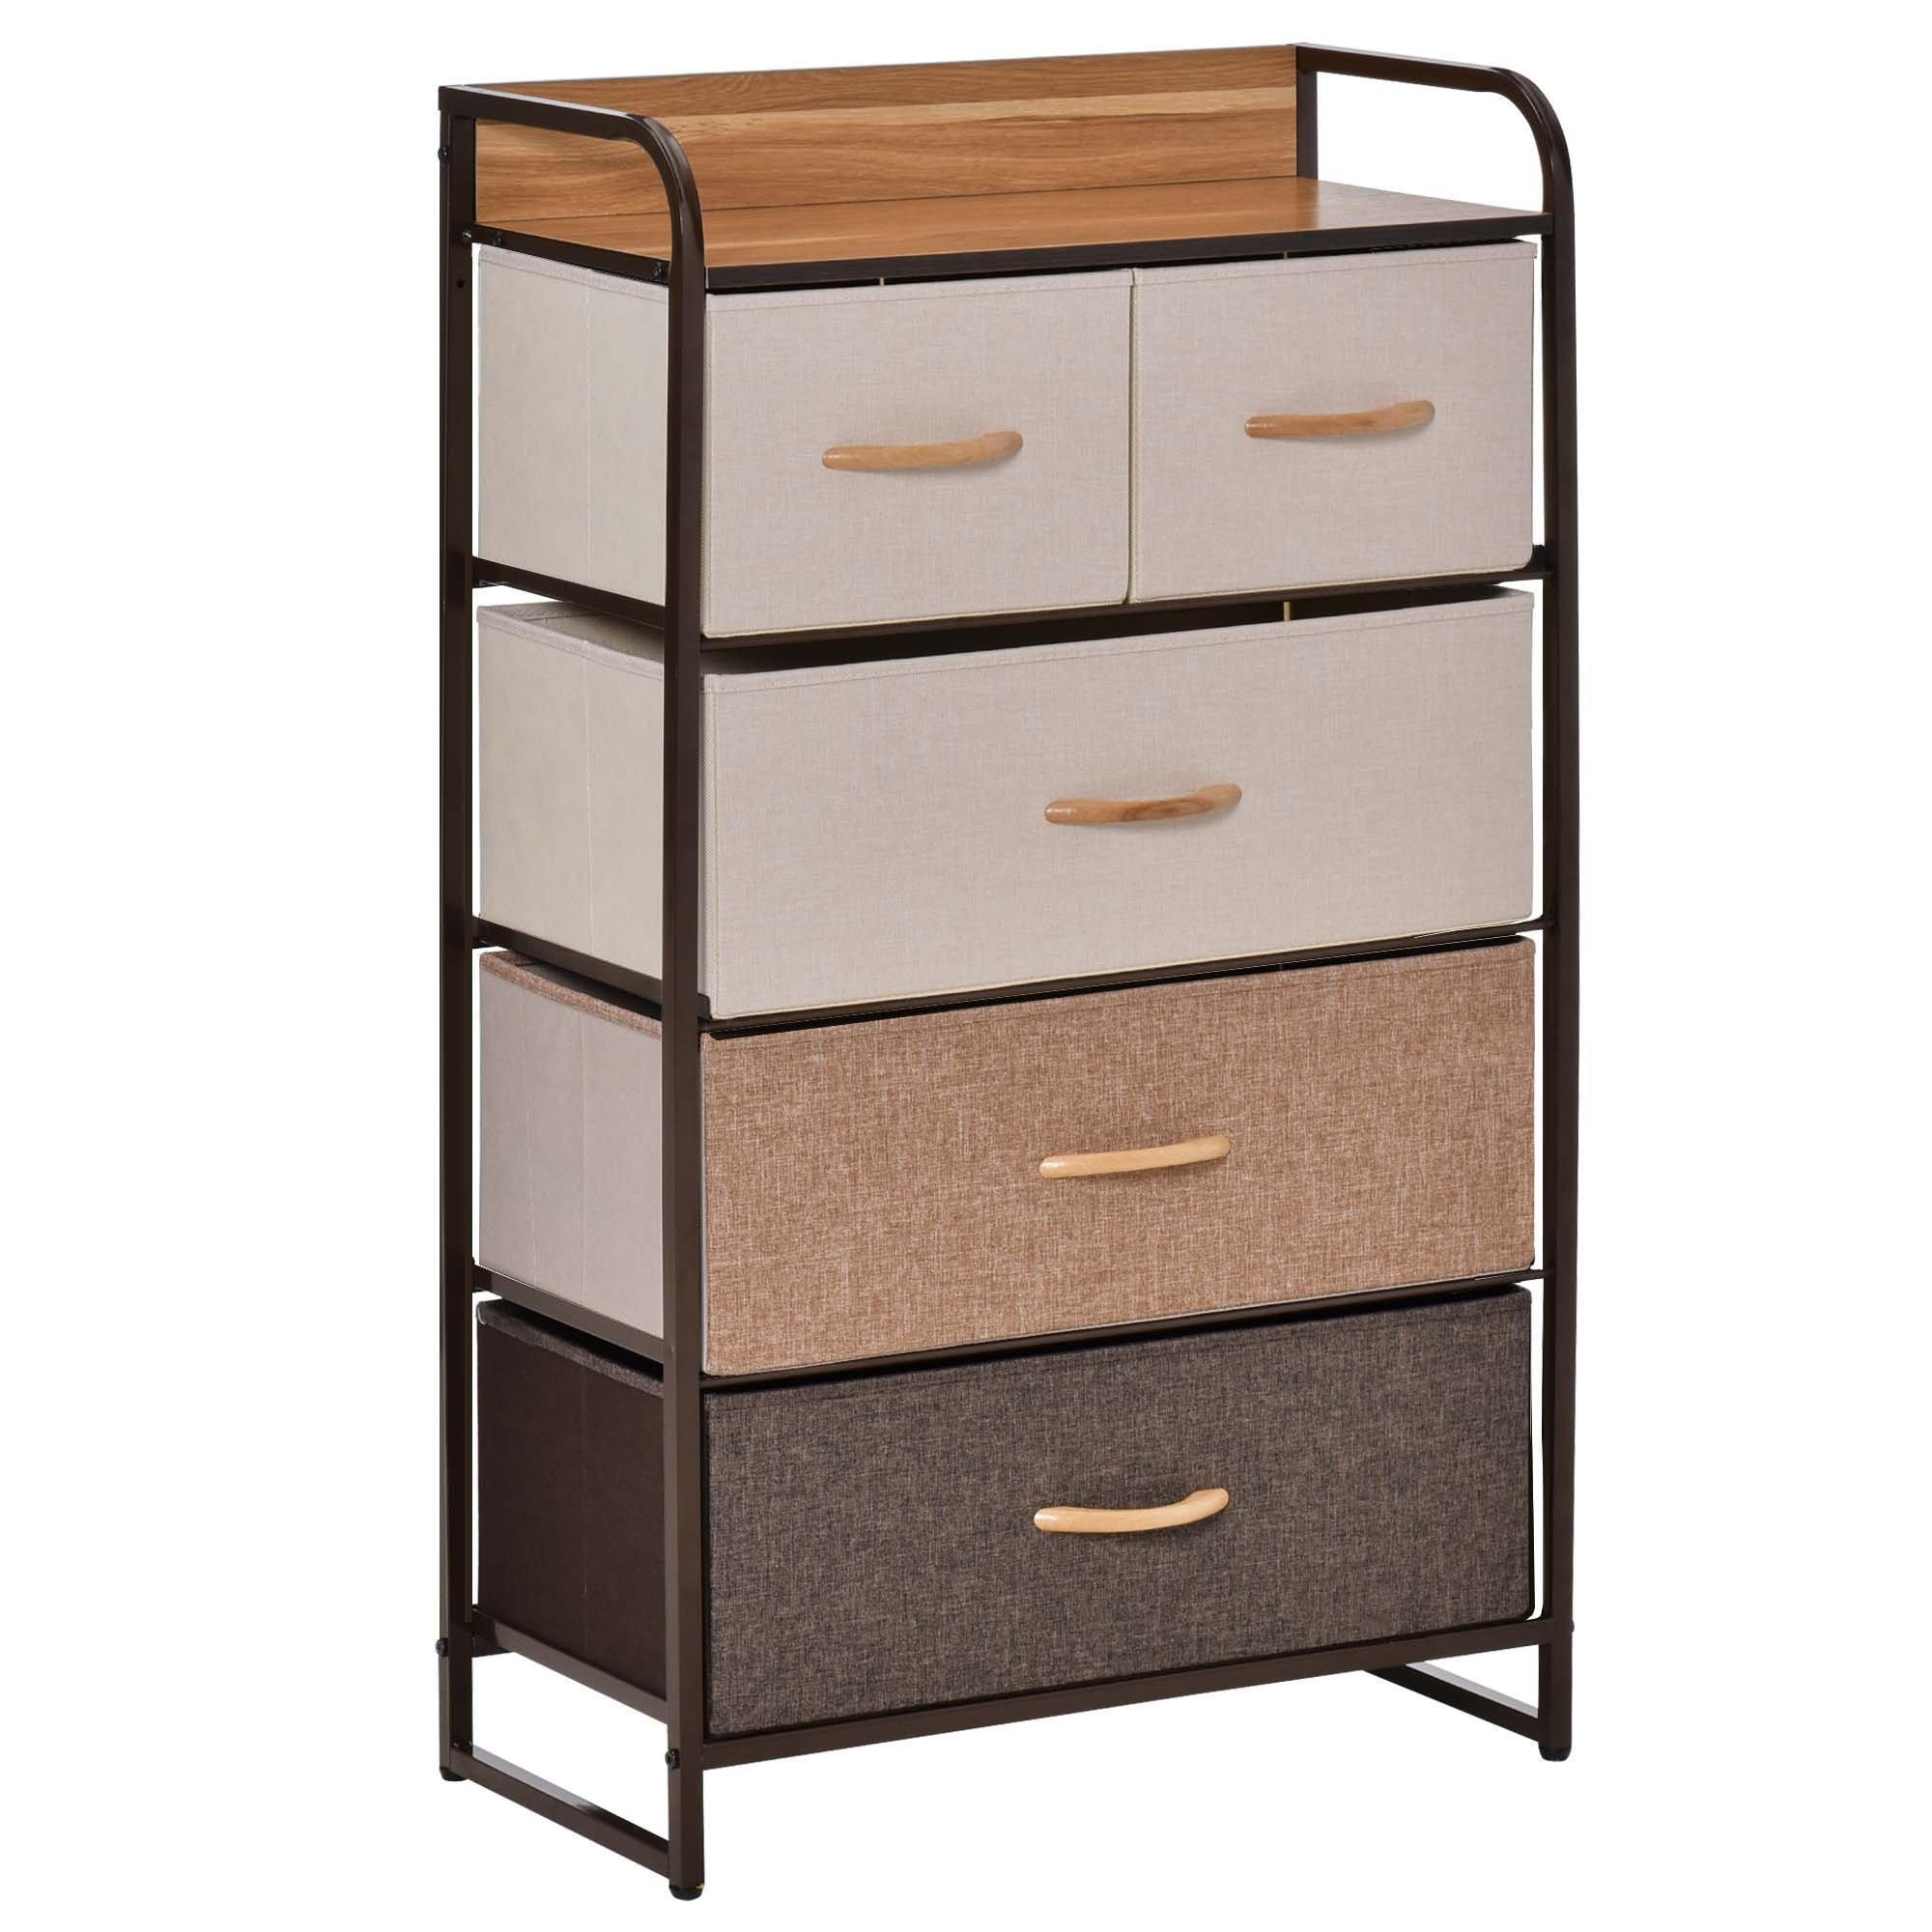 5 Drawer Dresser Tower Fabric Chest of Drawers with Steel Frame - image 1